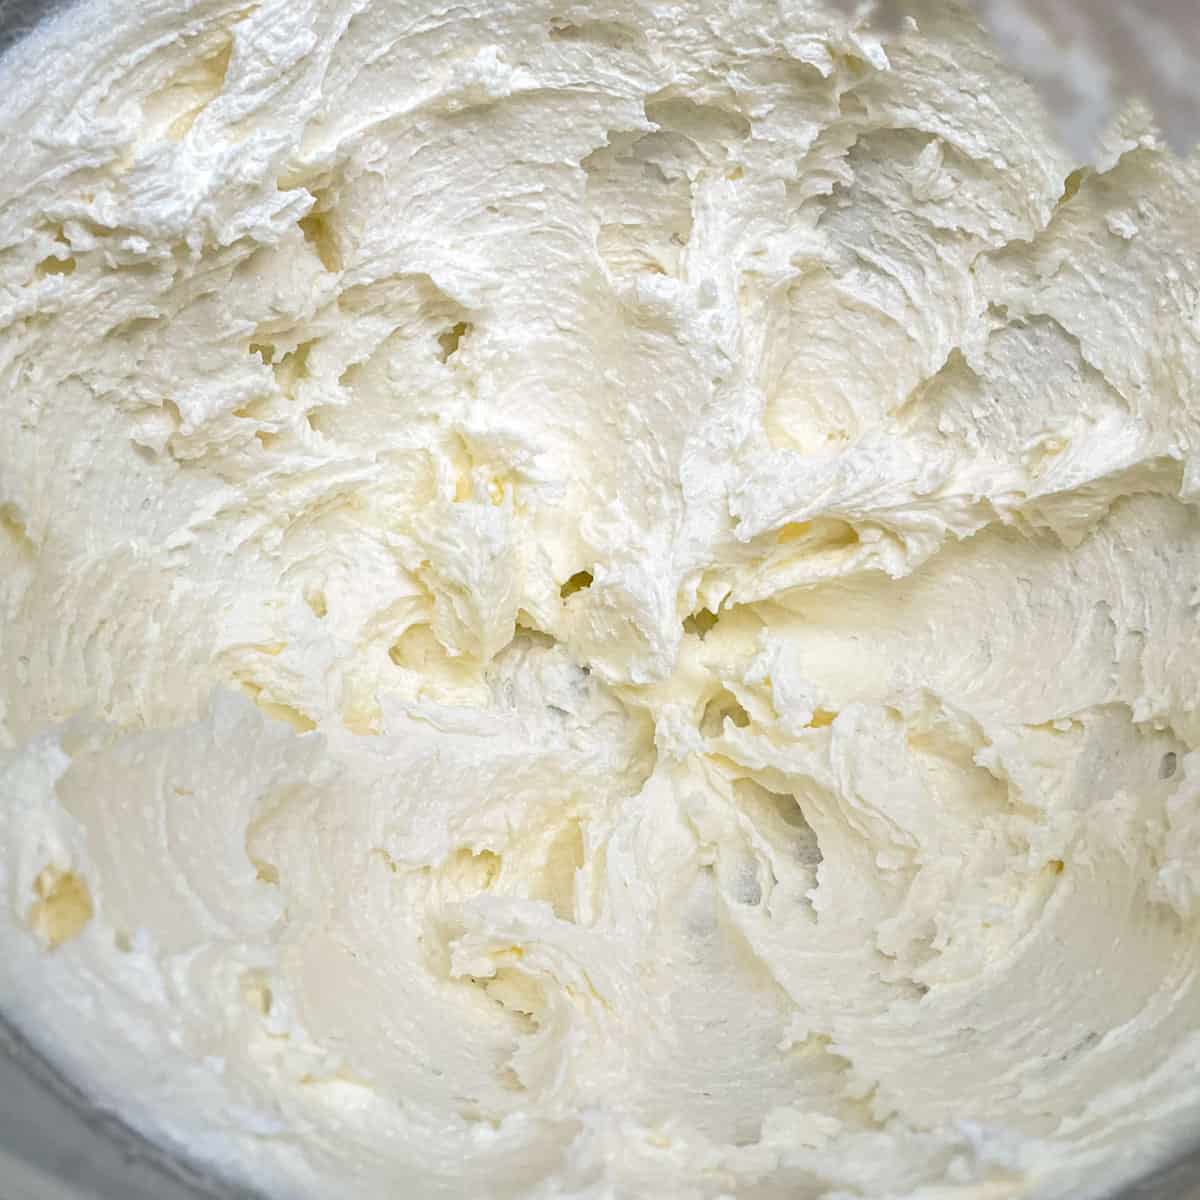 Fluffy butter and sugar after mixing for 3 minutes.